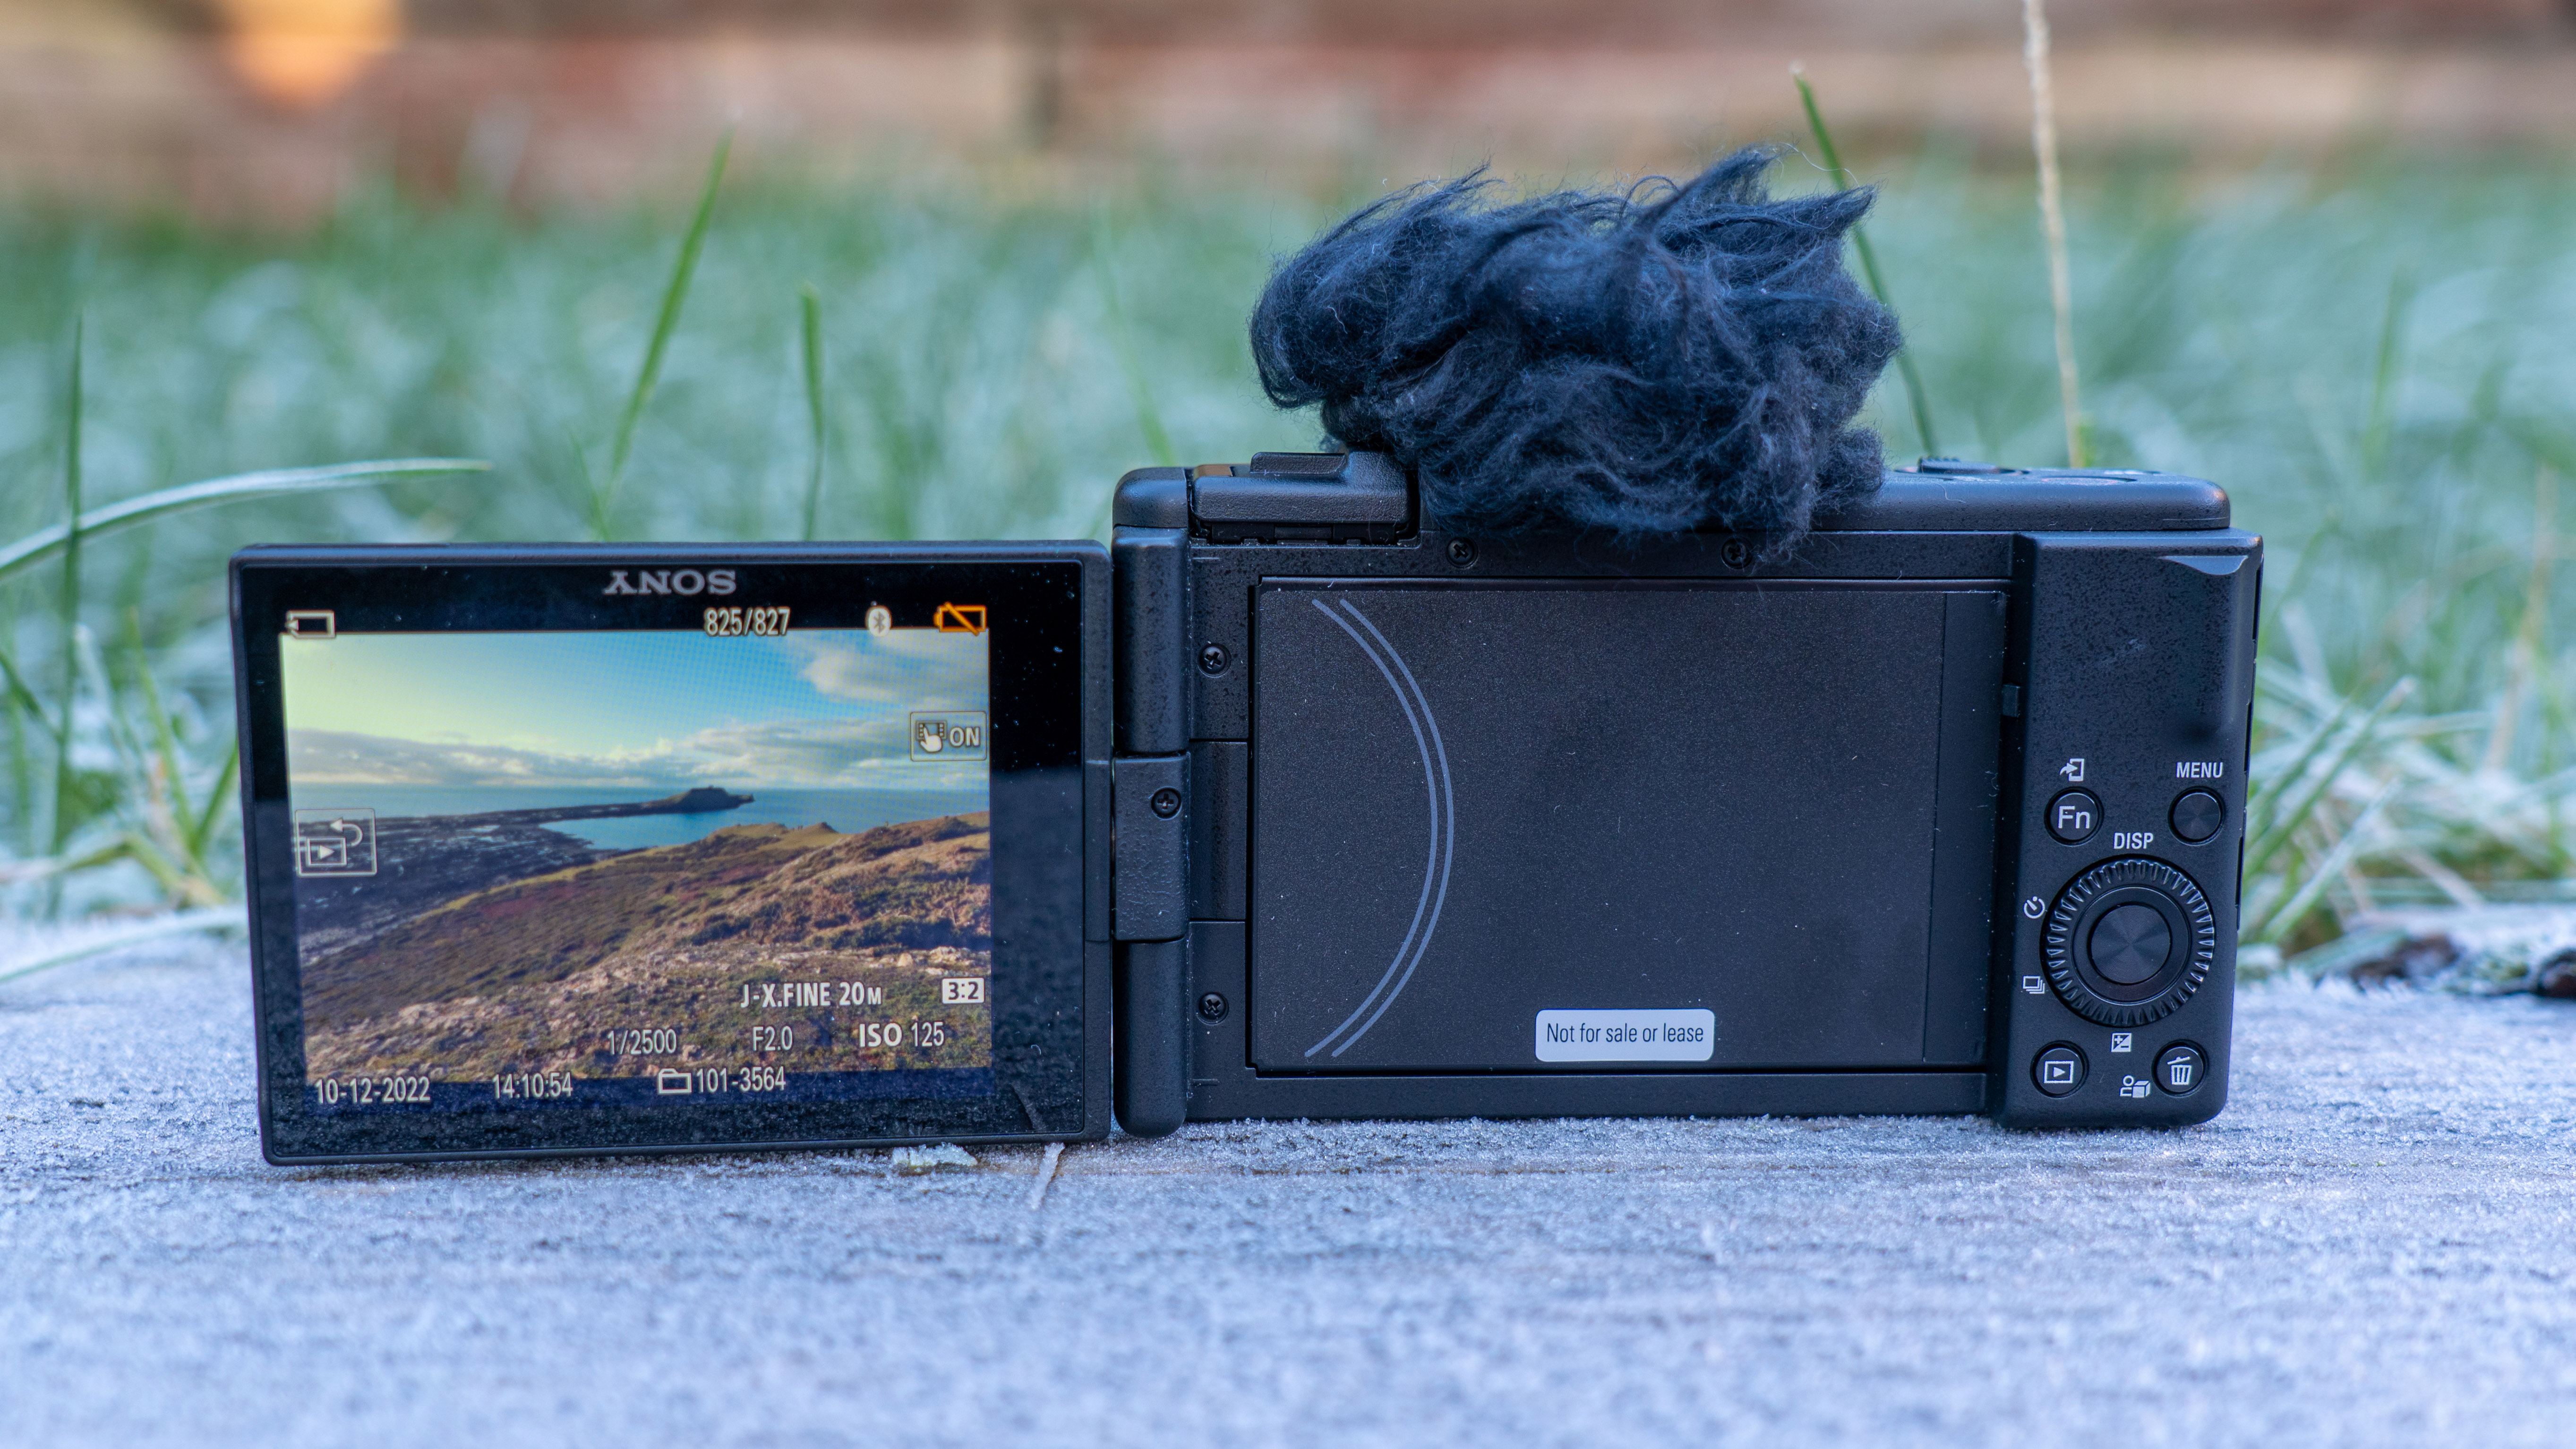 The Sony ZV1-F compact camera sitting on the ground